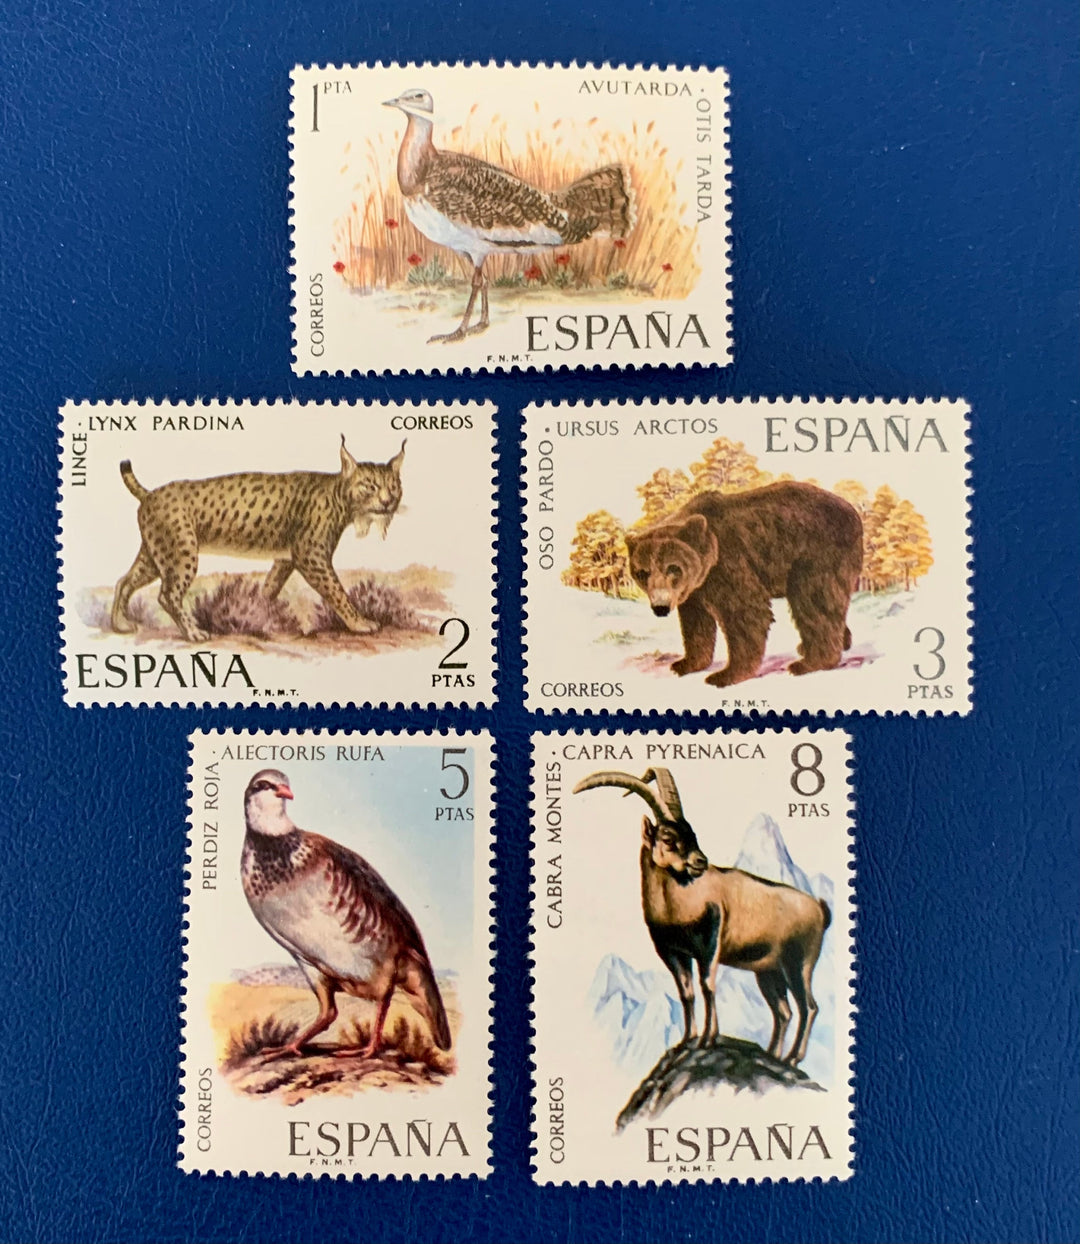 Spain - Original Vintage Postage Stamps- 1971 Hispanic Fauna - for the collector, artist or crafter - Scrapbooking, decoupage, collage